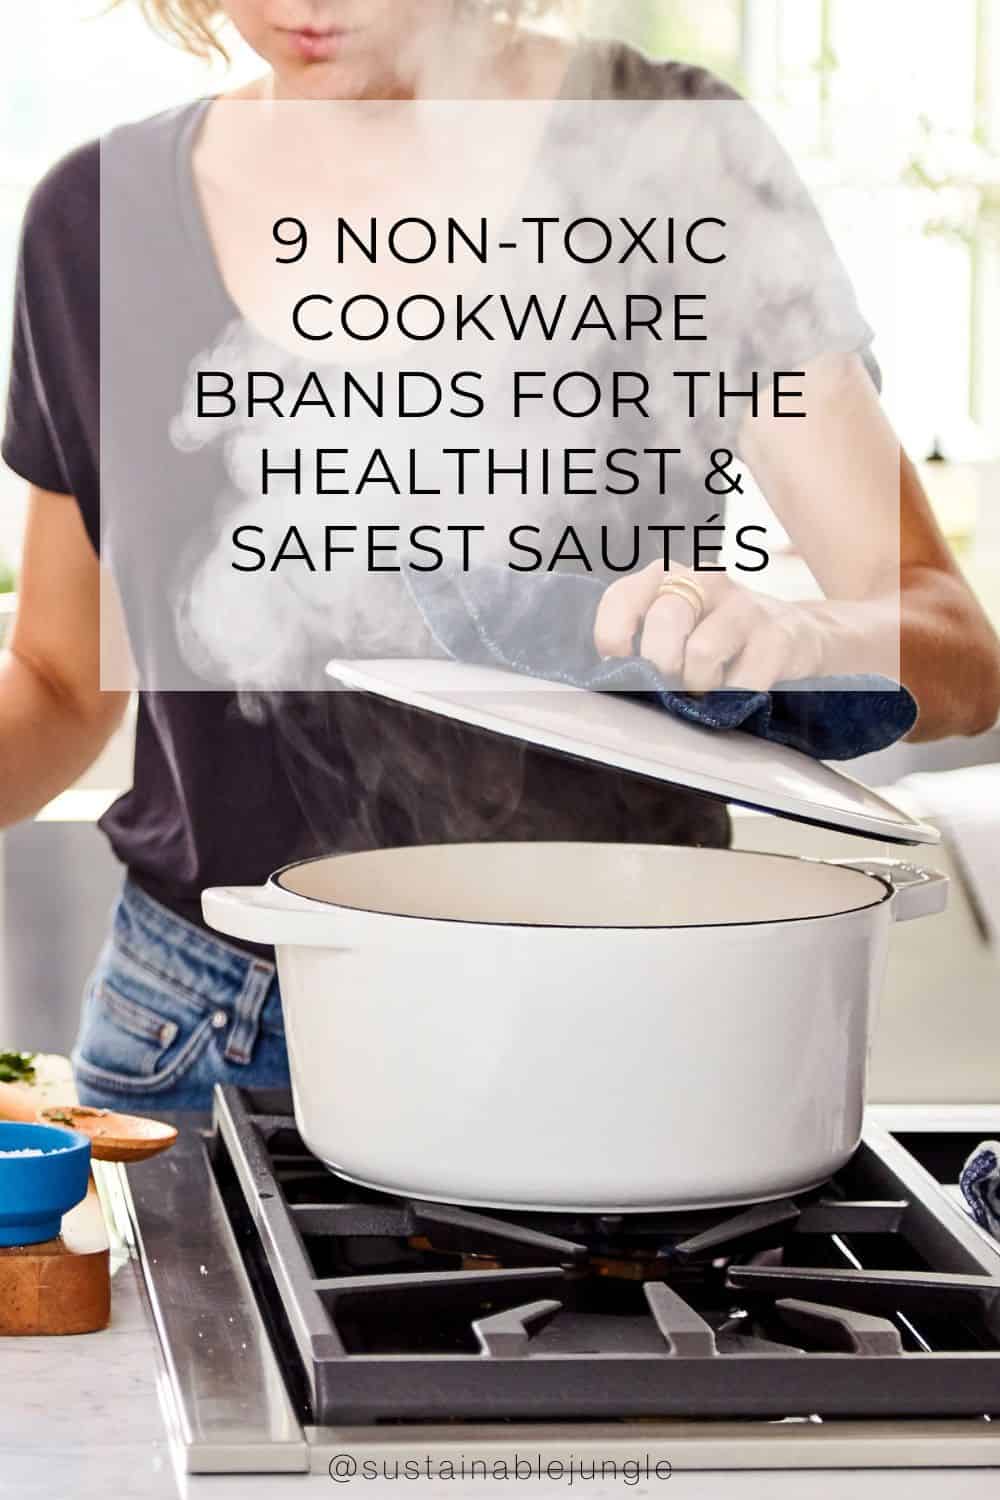 9 Non-Toxic Cookware Brands For The Healthiest & Safest Sautés Image by Milo Cookware Kana #nontoxiccookware #safestnontoxiccookware #nontoxicpotsandpans #nontoxicnonstickcookware #healthiestcookware #healthycookware #sustainablejungle